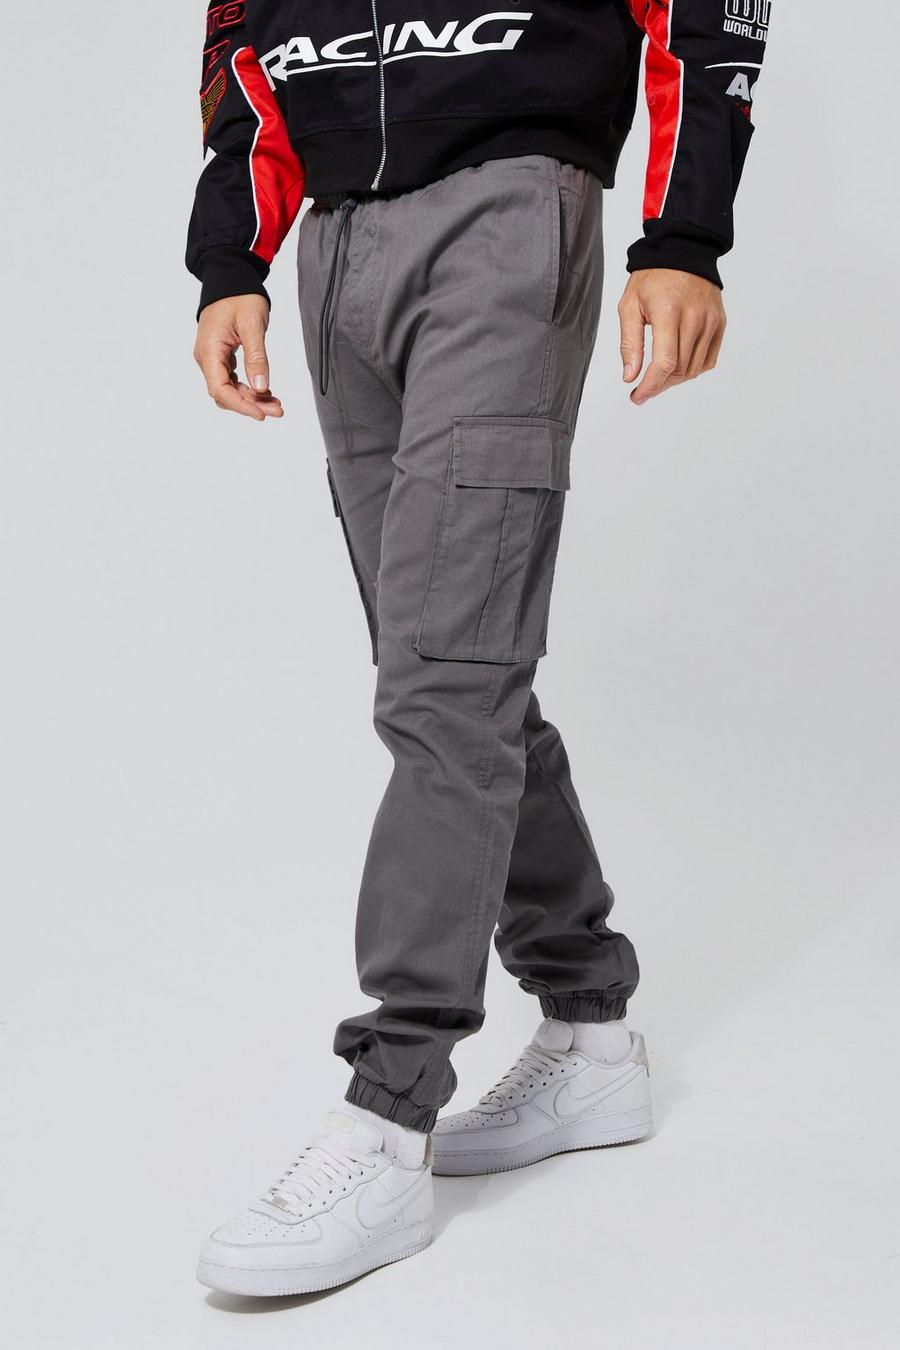 Mens Tall Clothing | Clothes For Tall Men | boohoo UK